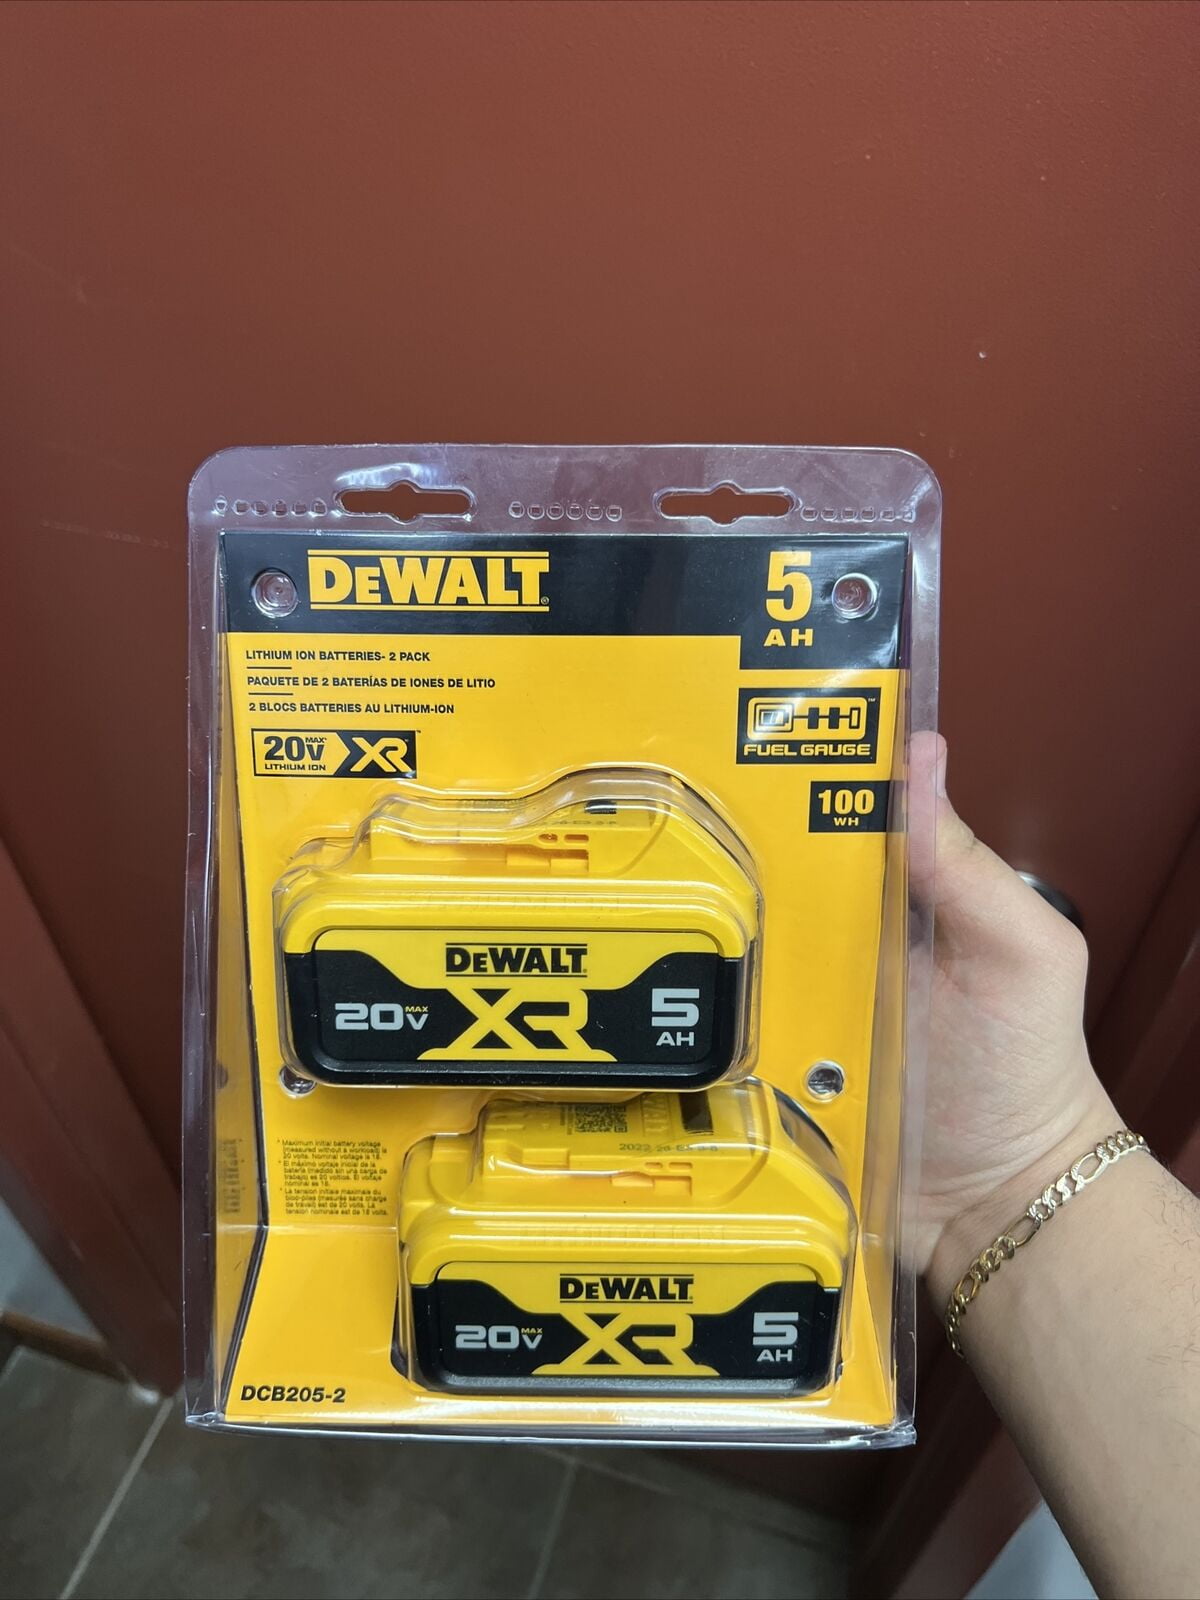 DeWALT Max XR Lithium-Ion 20V 5Ah Battery DCB205 - Two Pack with Charger 